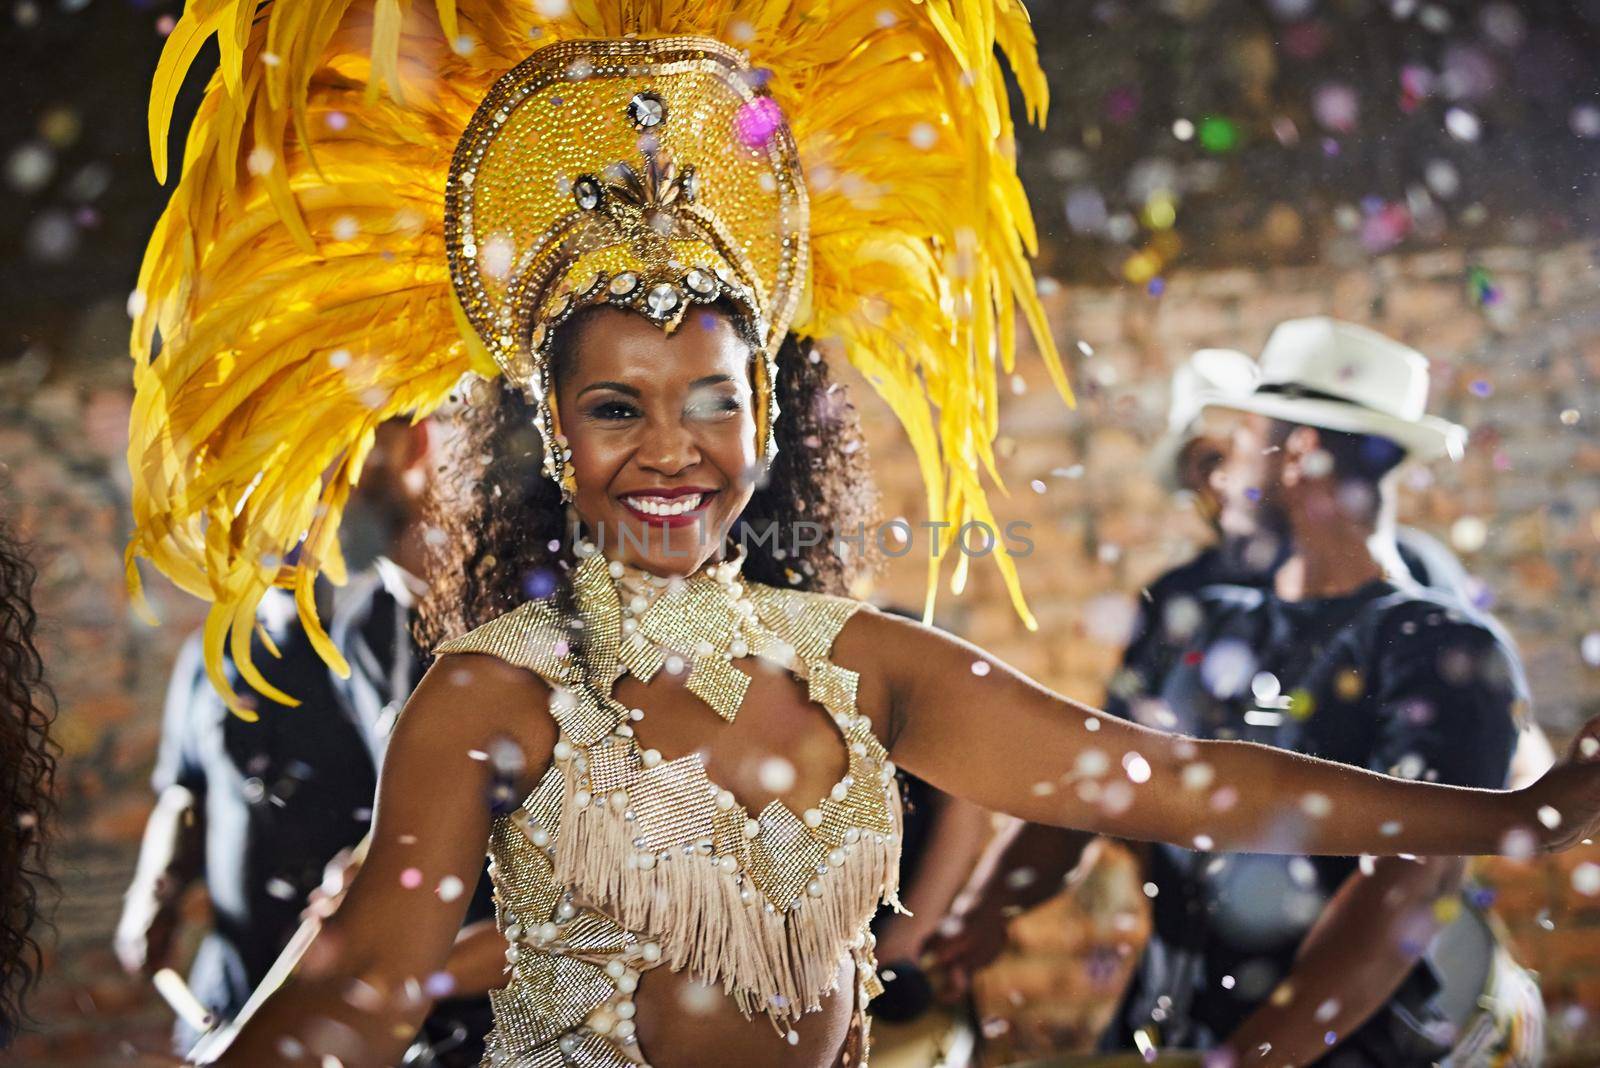 Shes the sparkling beauty of the show. Portrait of a samba dancer performing in a carnival. by YuriArcurs